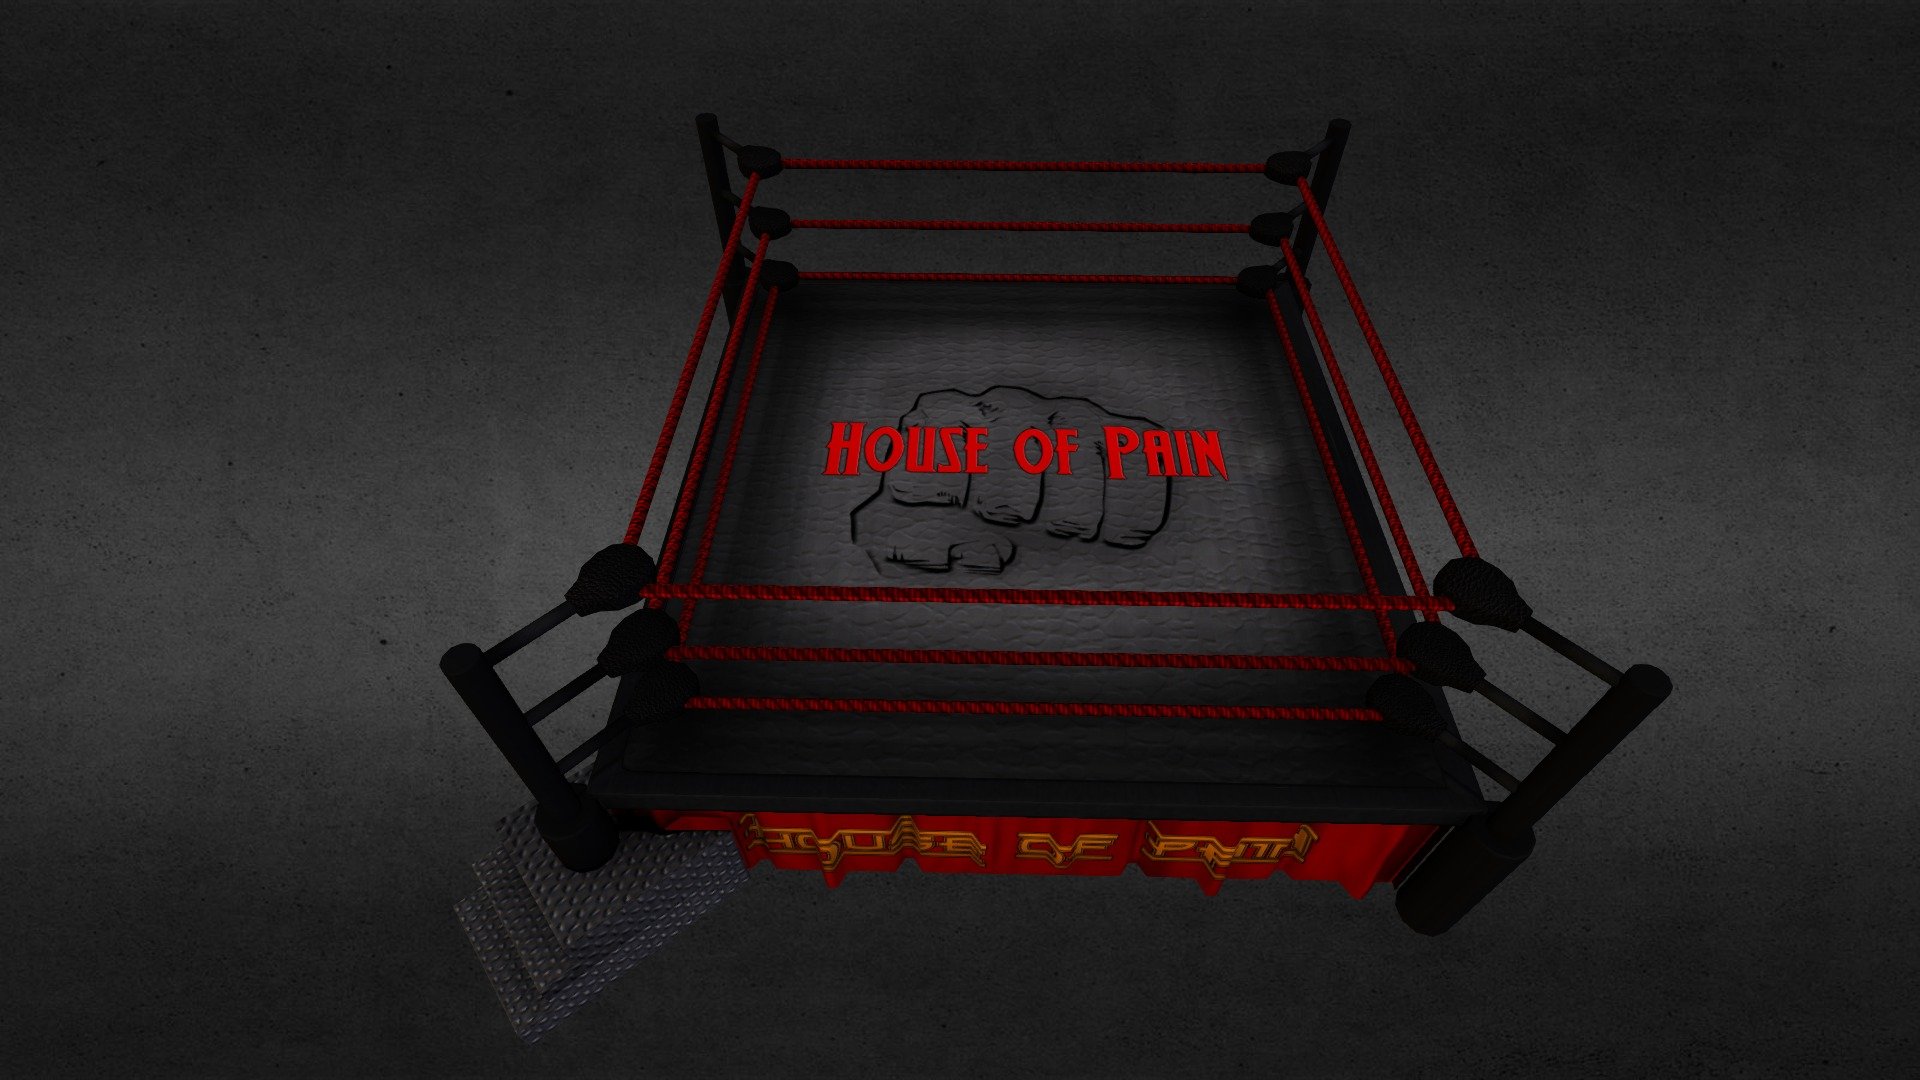 House of Pain - Wrestling Ring - Unity Game WIP